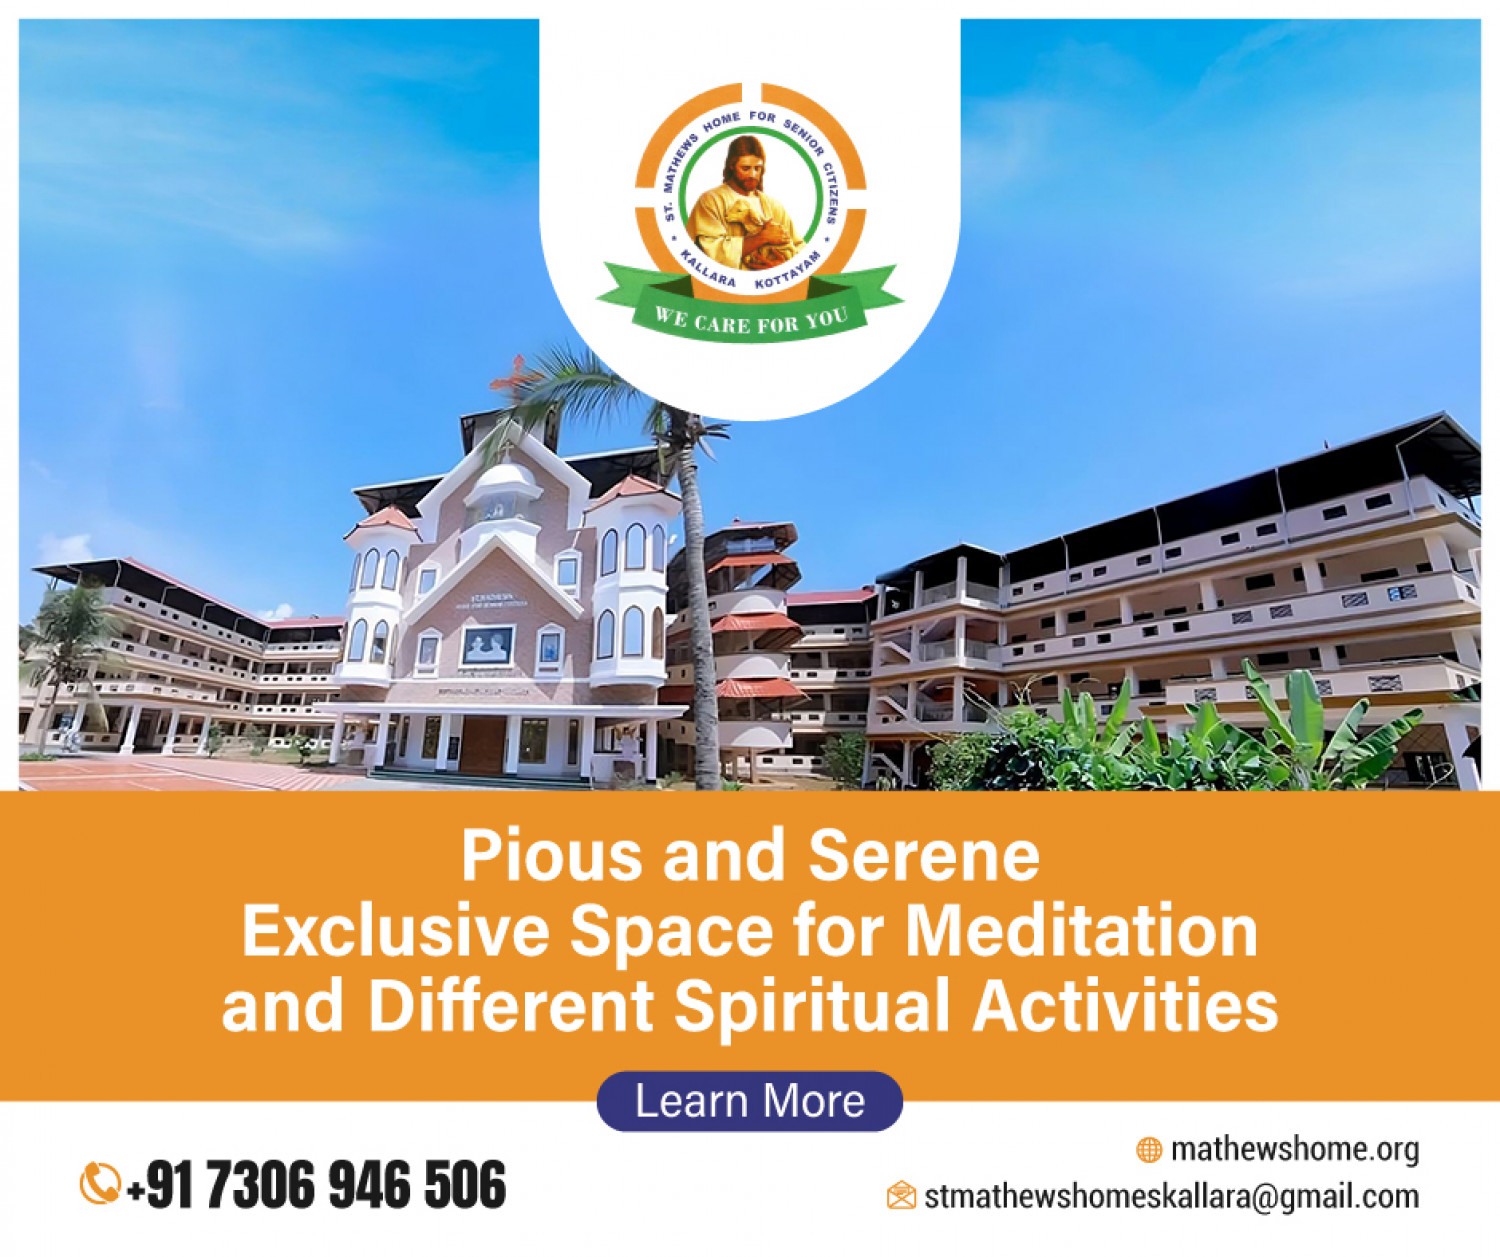 Pious and serene exclusive space for meditation and different spiritual activities Infographic